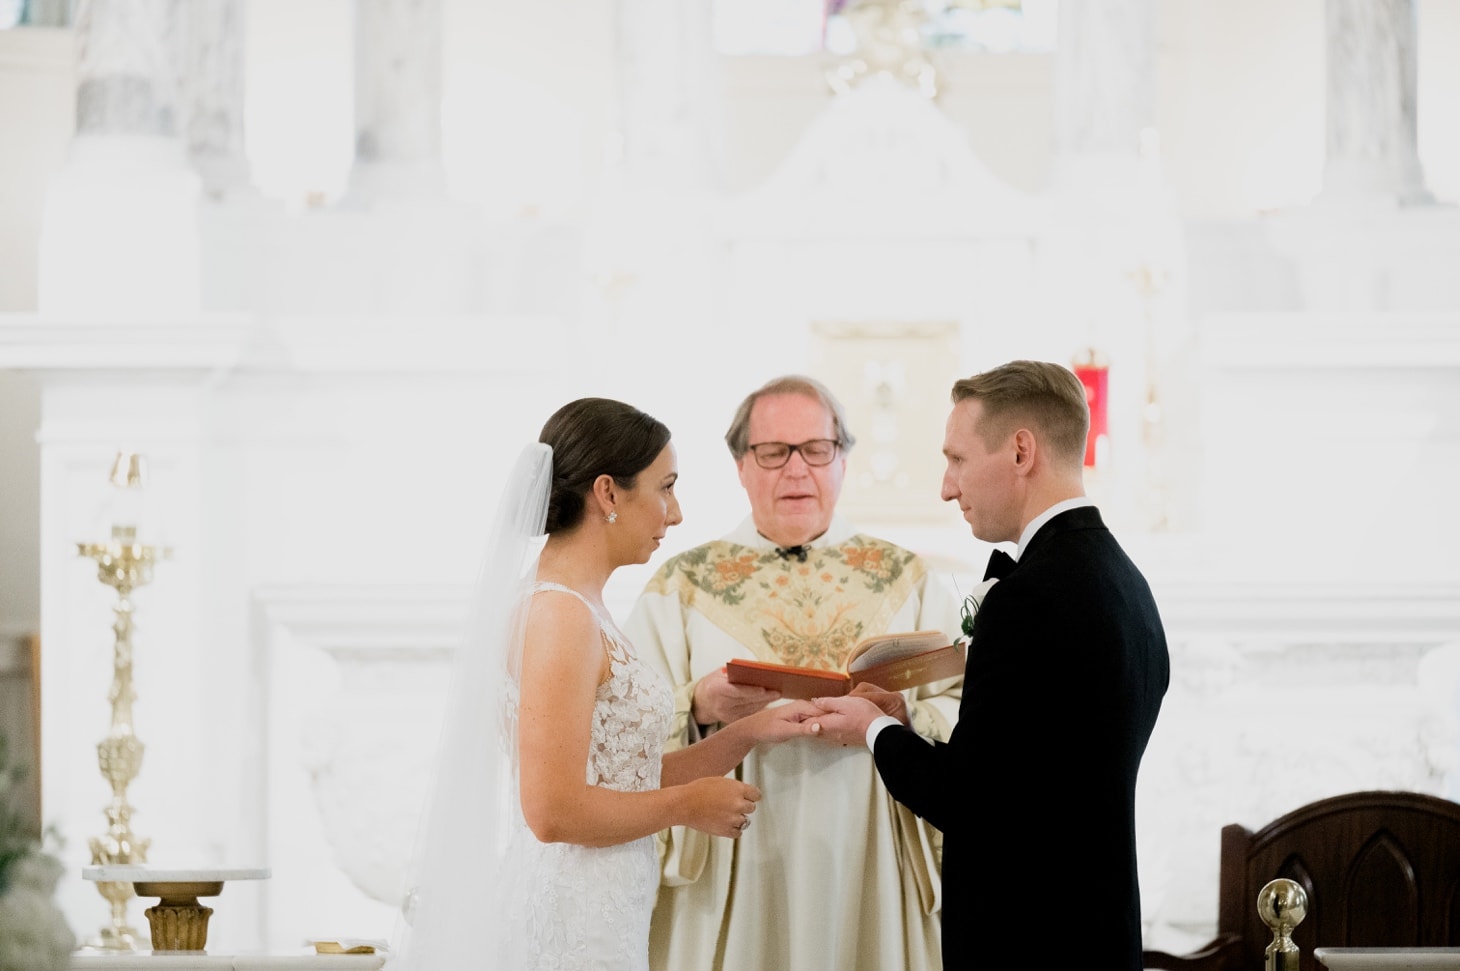 29 wedding vows new jersey wedding photography